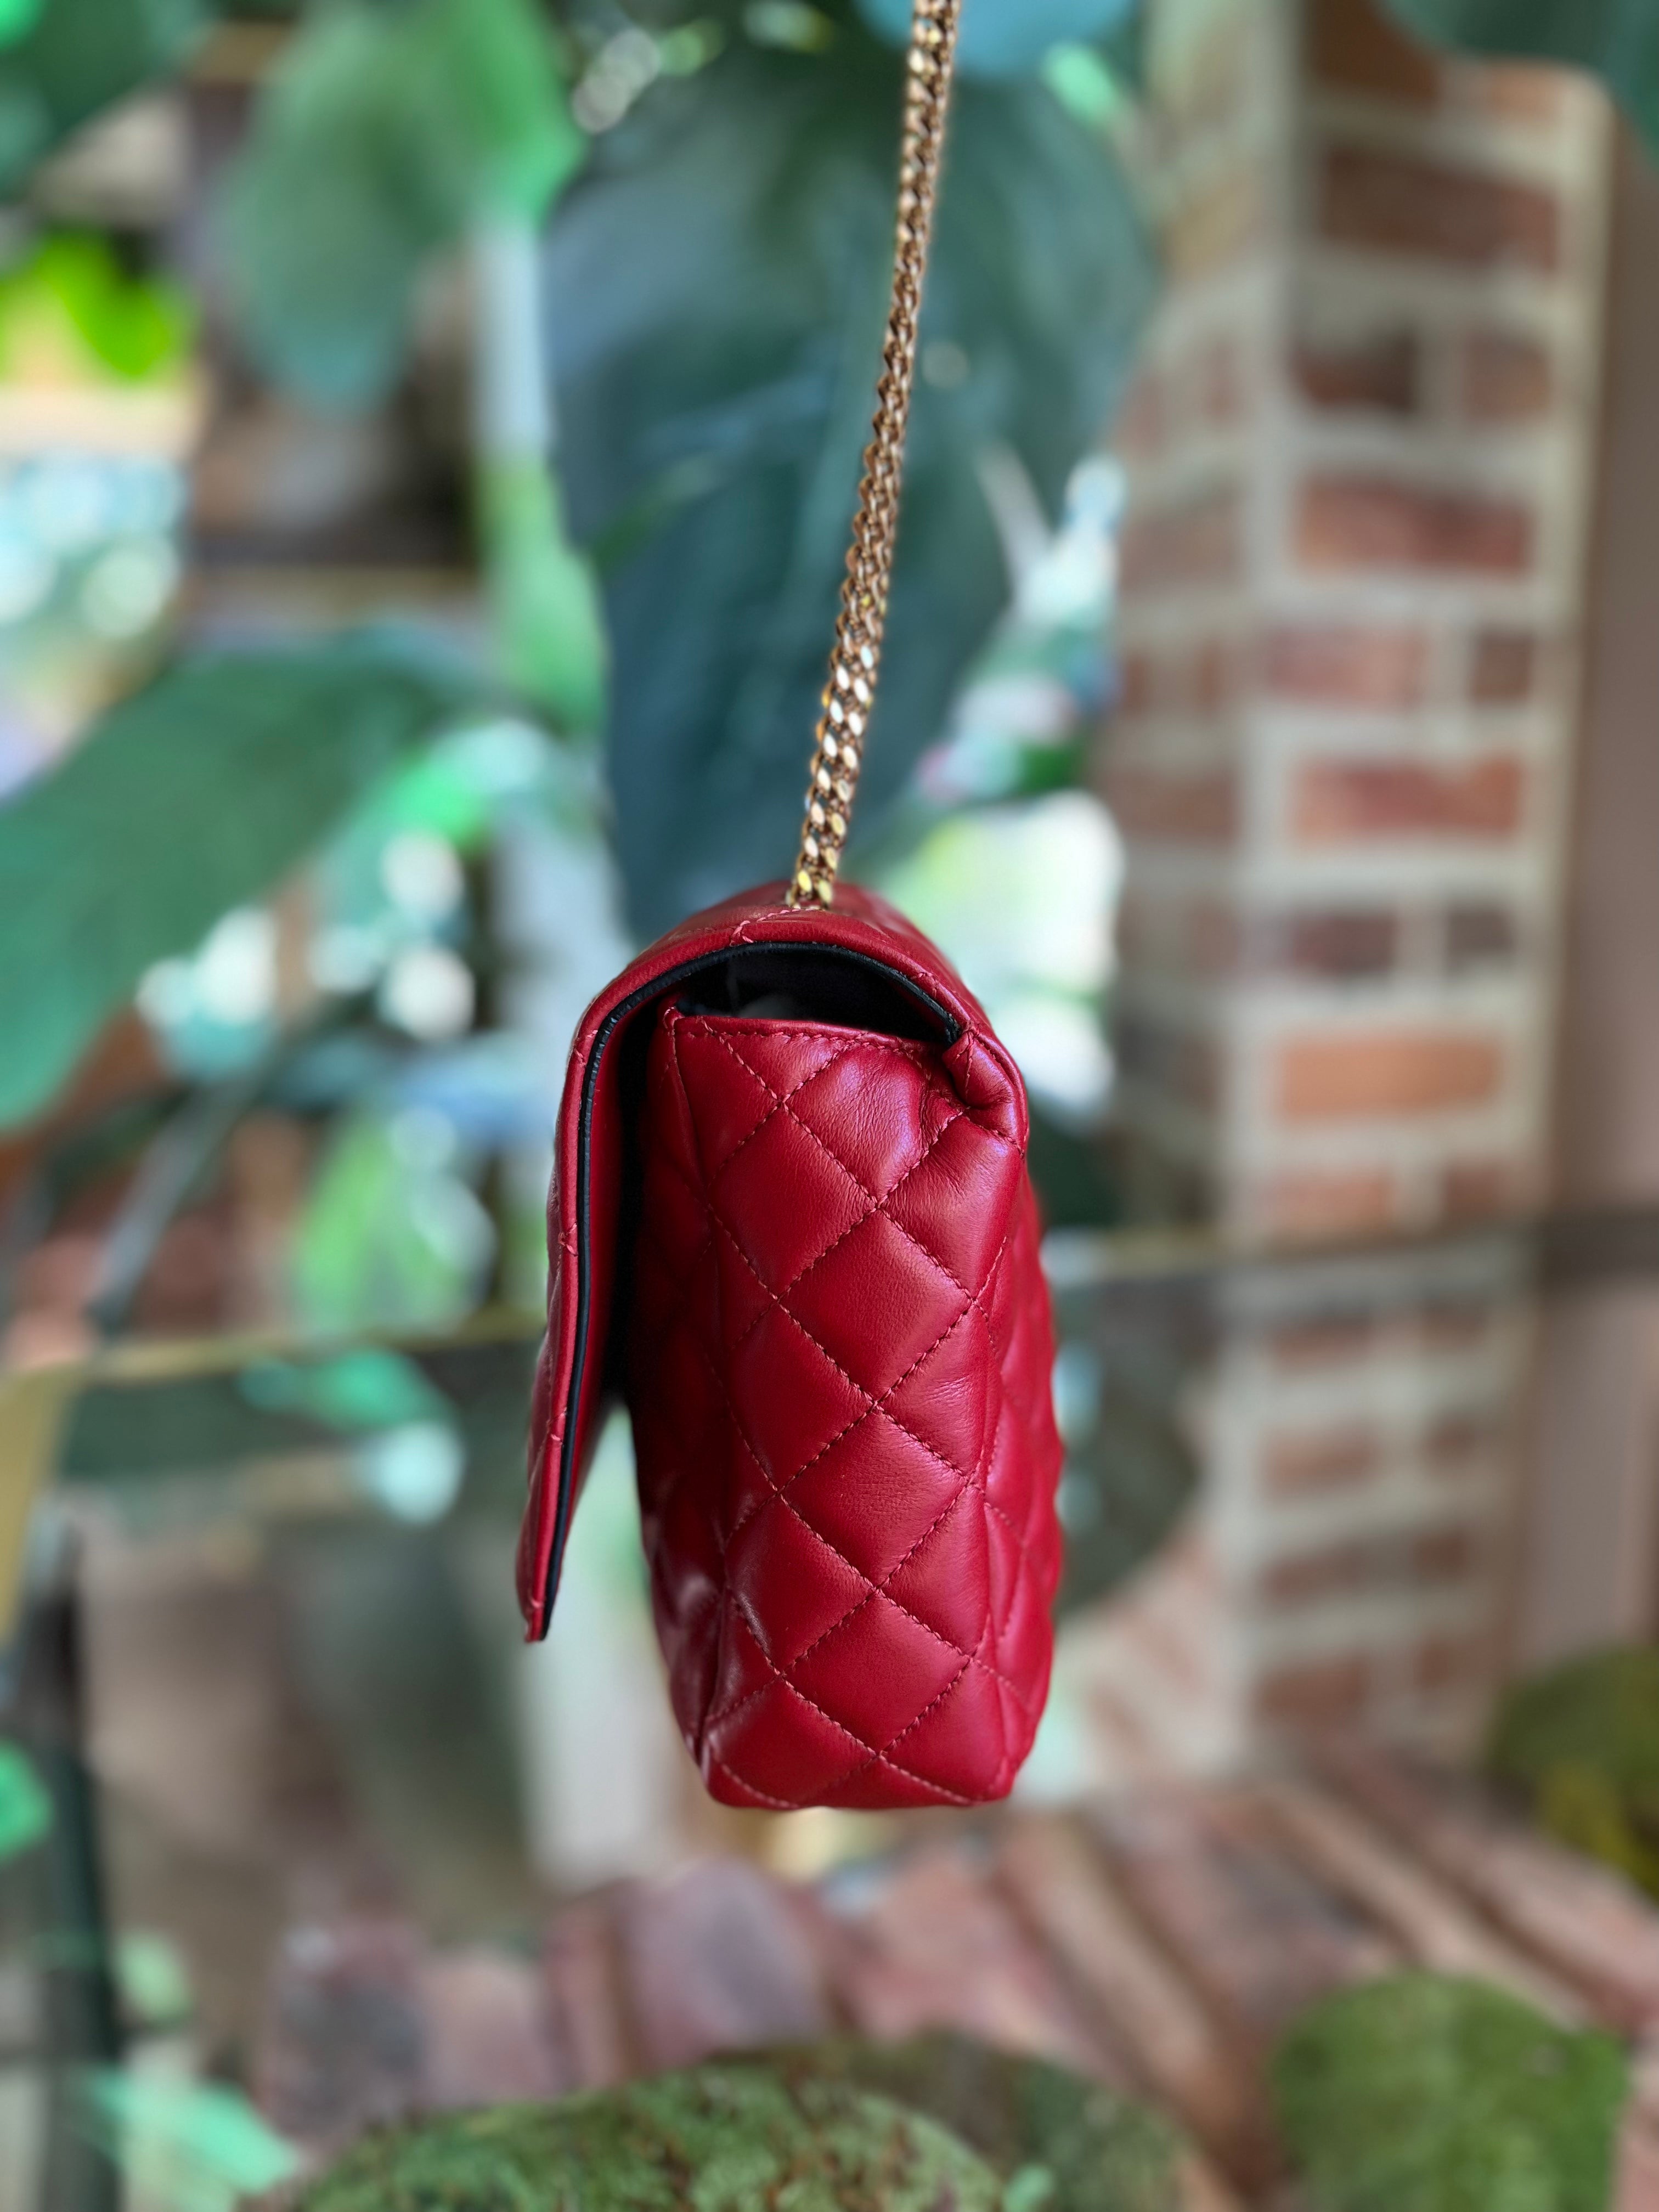 Red Quilted Caviar Leather Vintage Mini Flap Bag